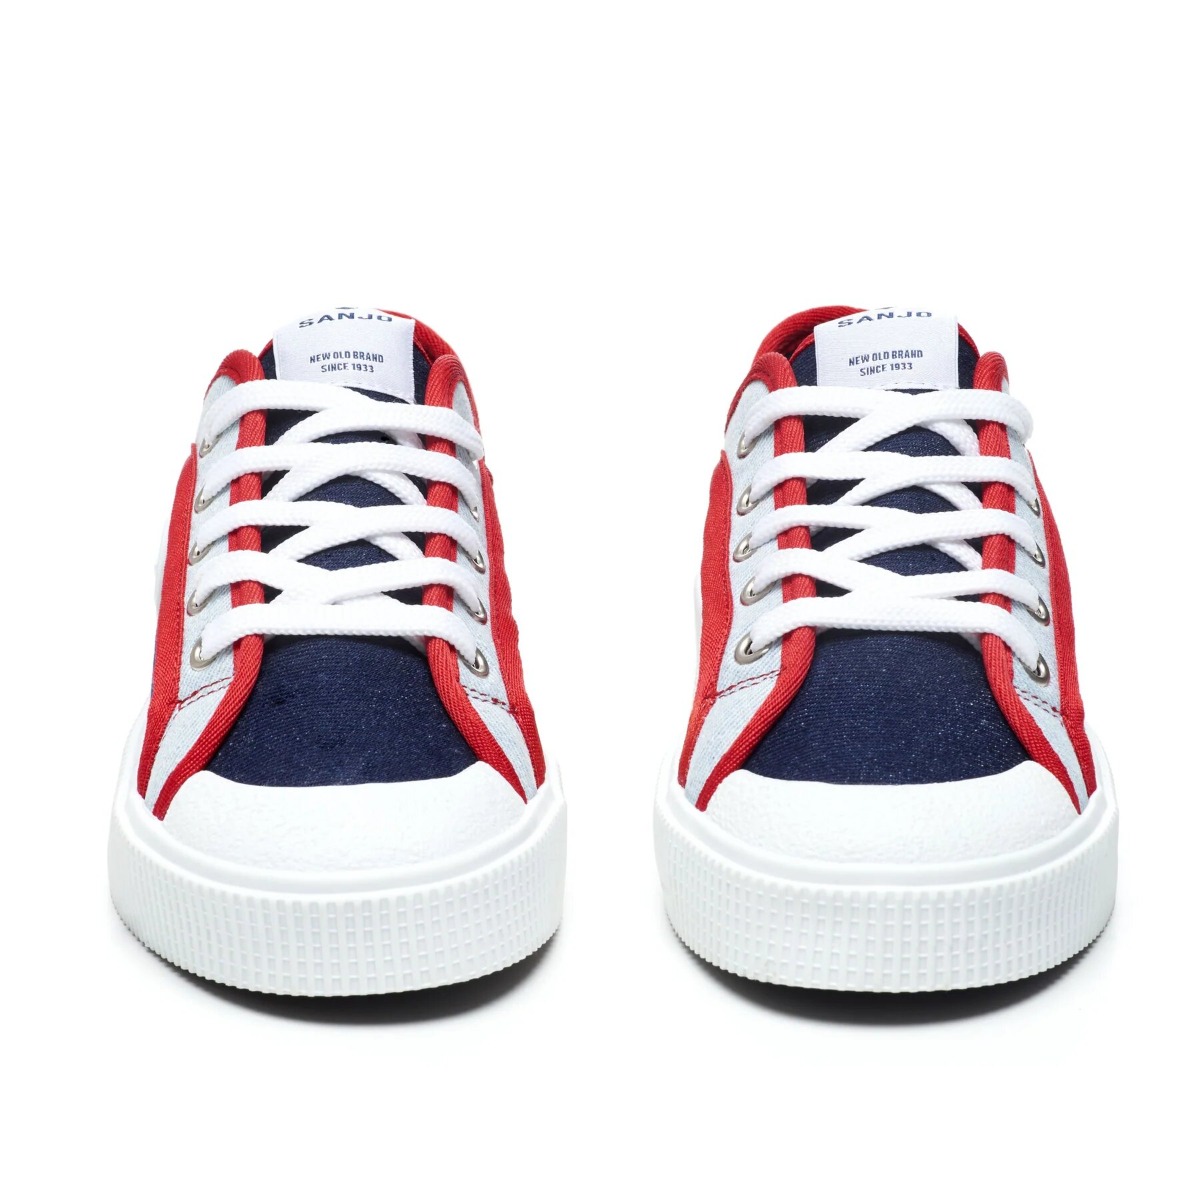 Sneakers Canvas Blauw Rood